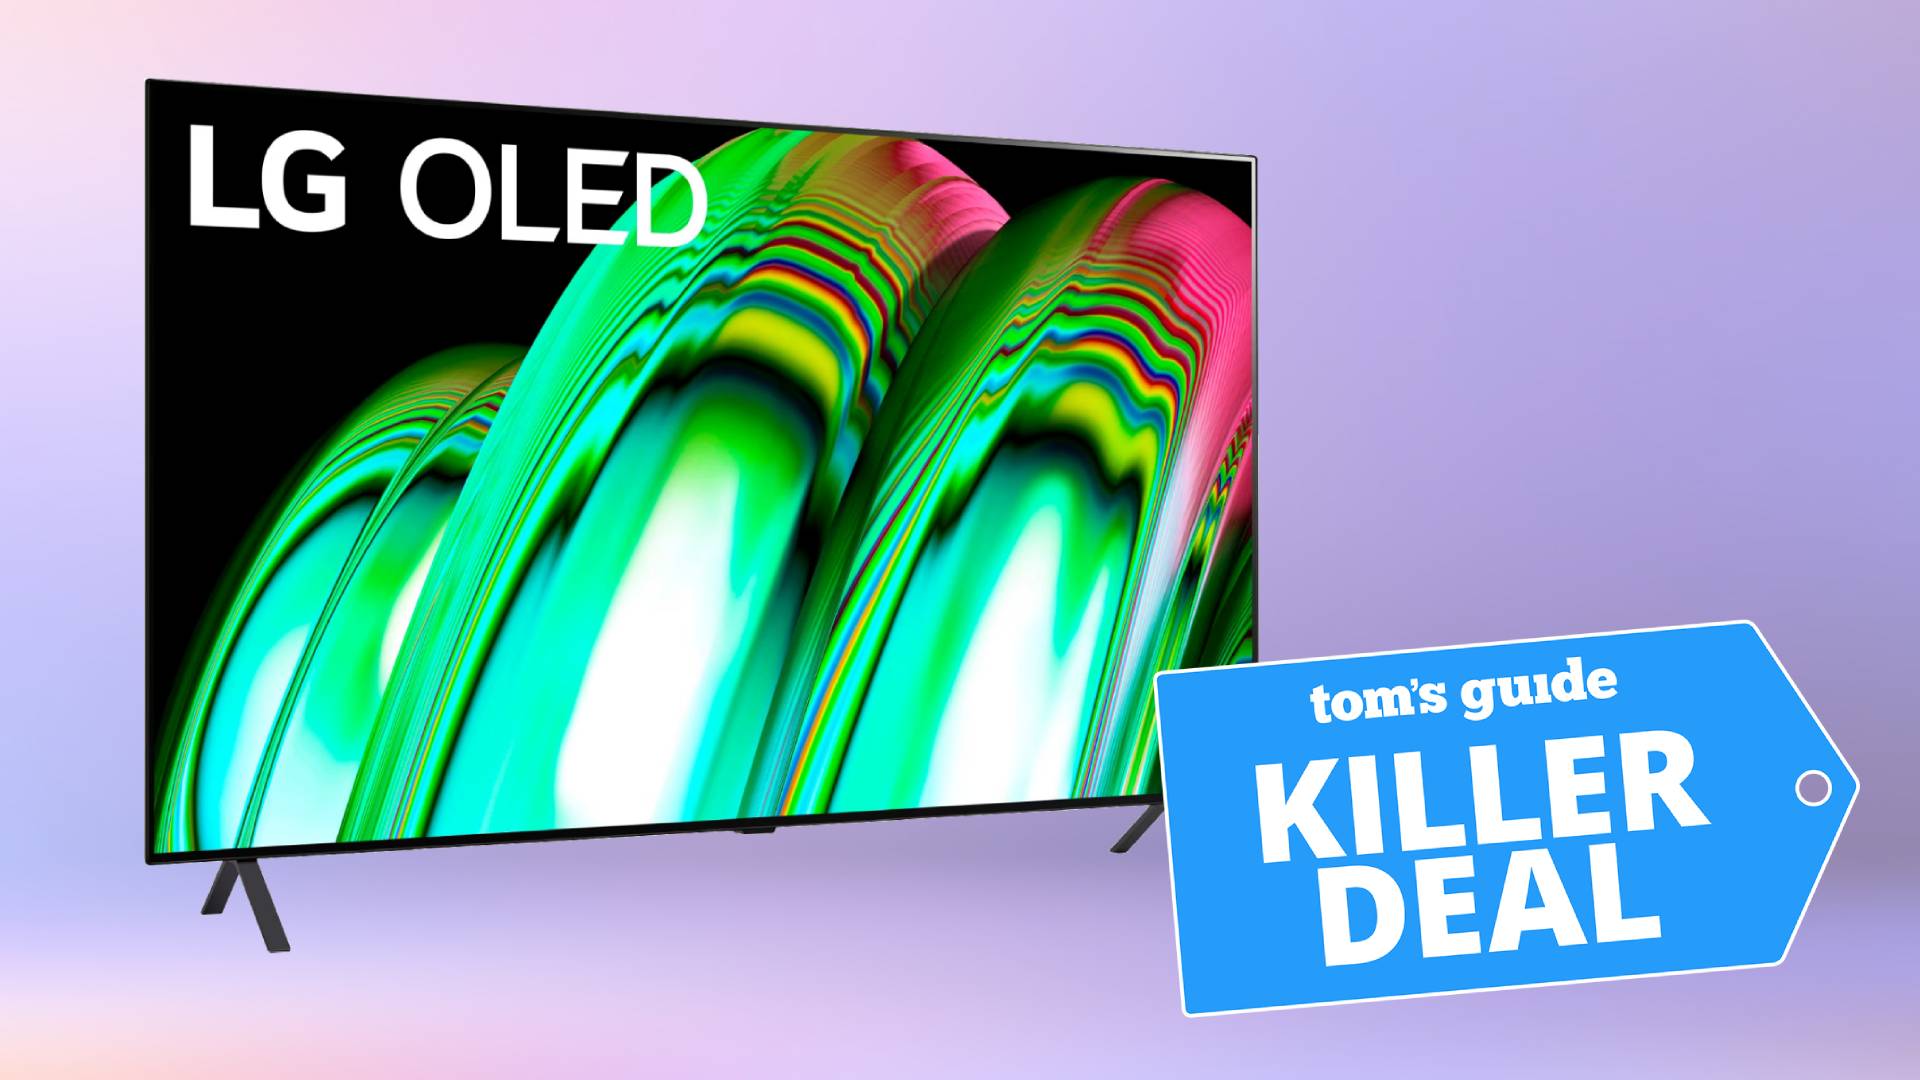 A shot of the LG A2 OLED 4K TV against a purple background